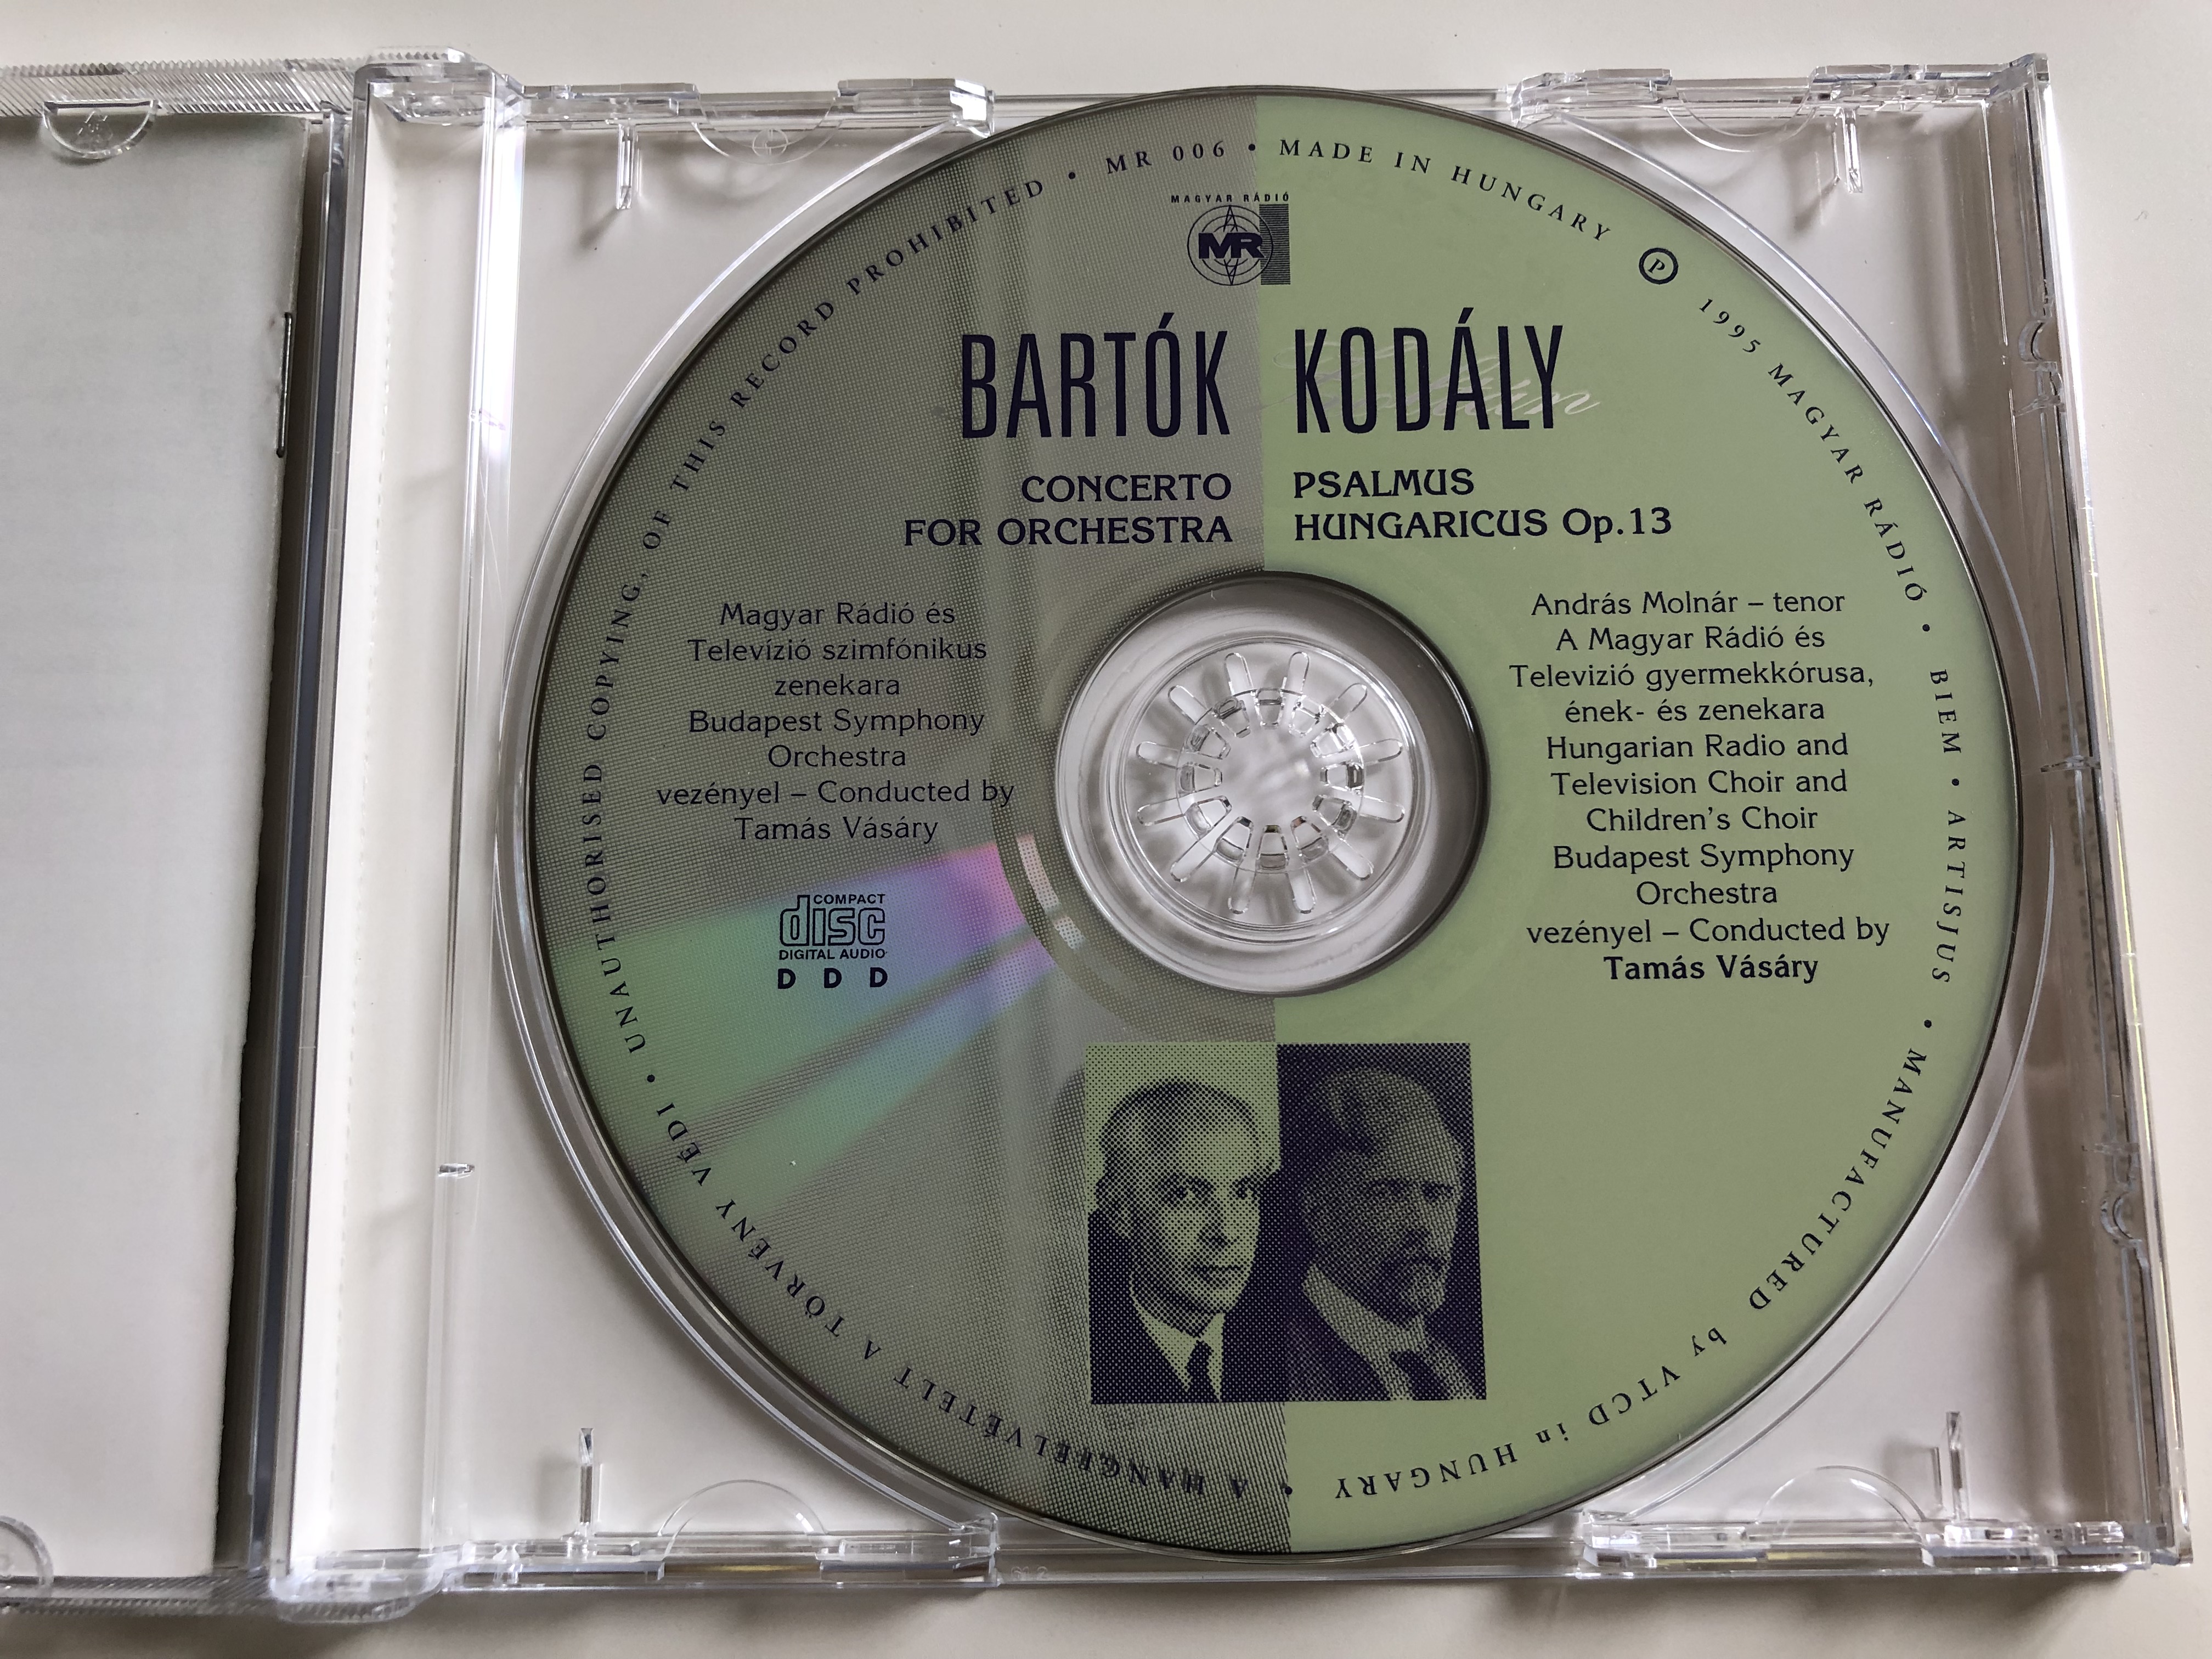 bart-k-b-la-concerto-for-orchestra-kod-ly-zolt-n-psalmus-hungaricus-op.-13-hungarian-radio-and-tv-symphonic-orchestra-cond.-tam-s-v-s-ry-audio-cd-11-.jpg